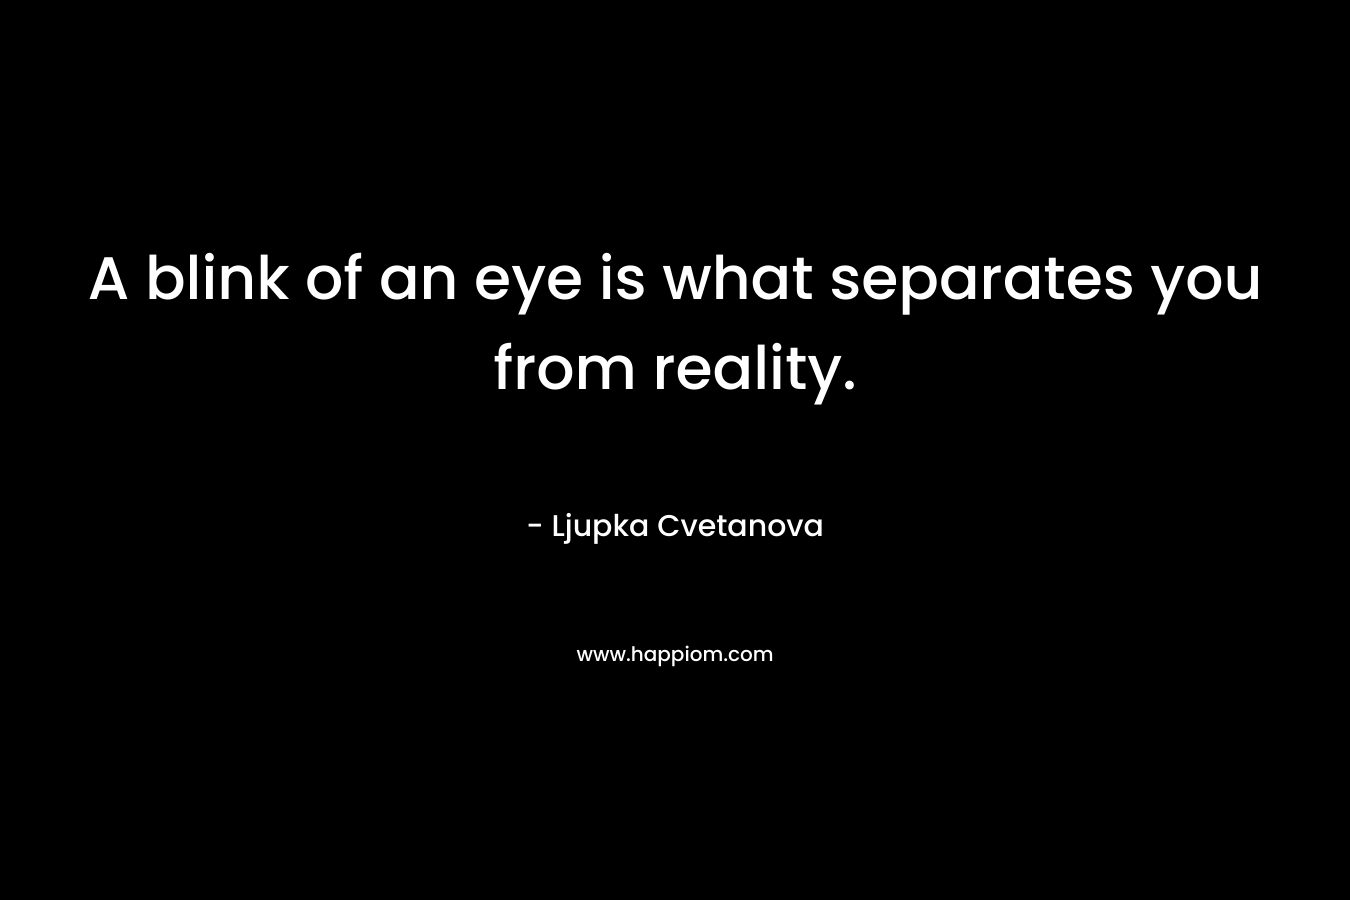 A blink of an eye is what separates you from reality. – Ljupka Cvetanova